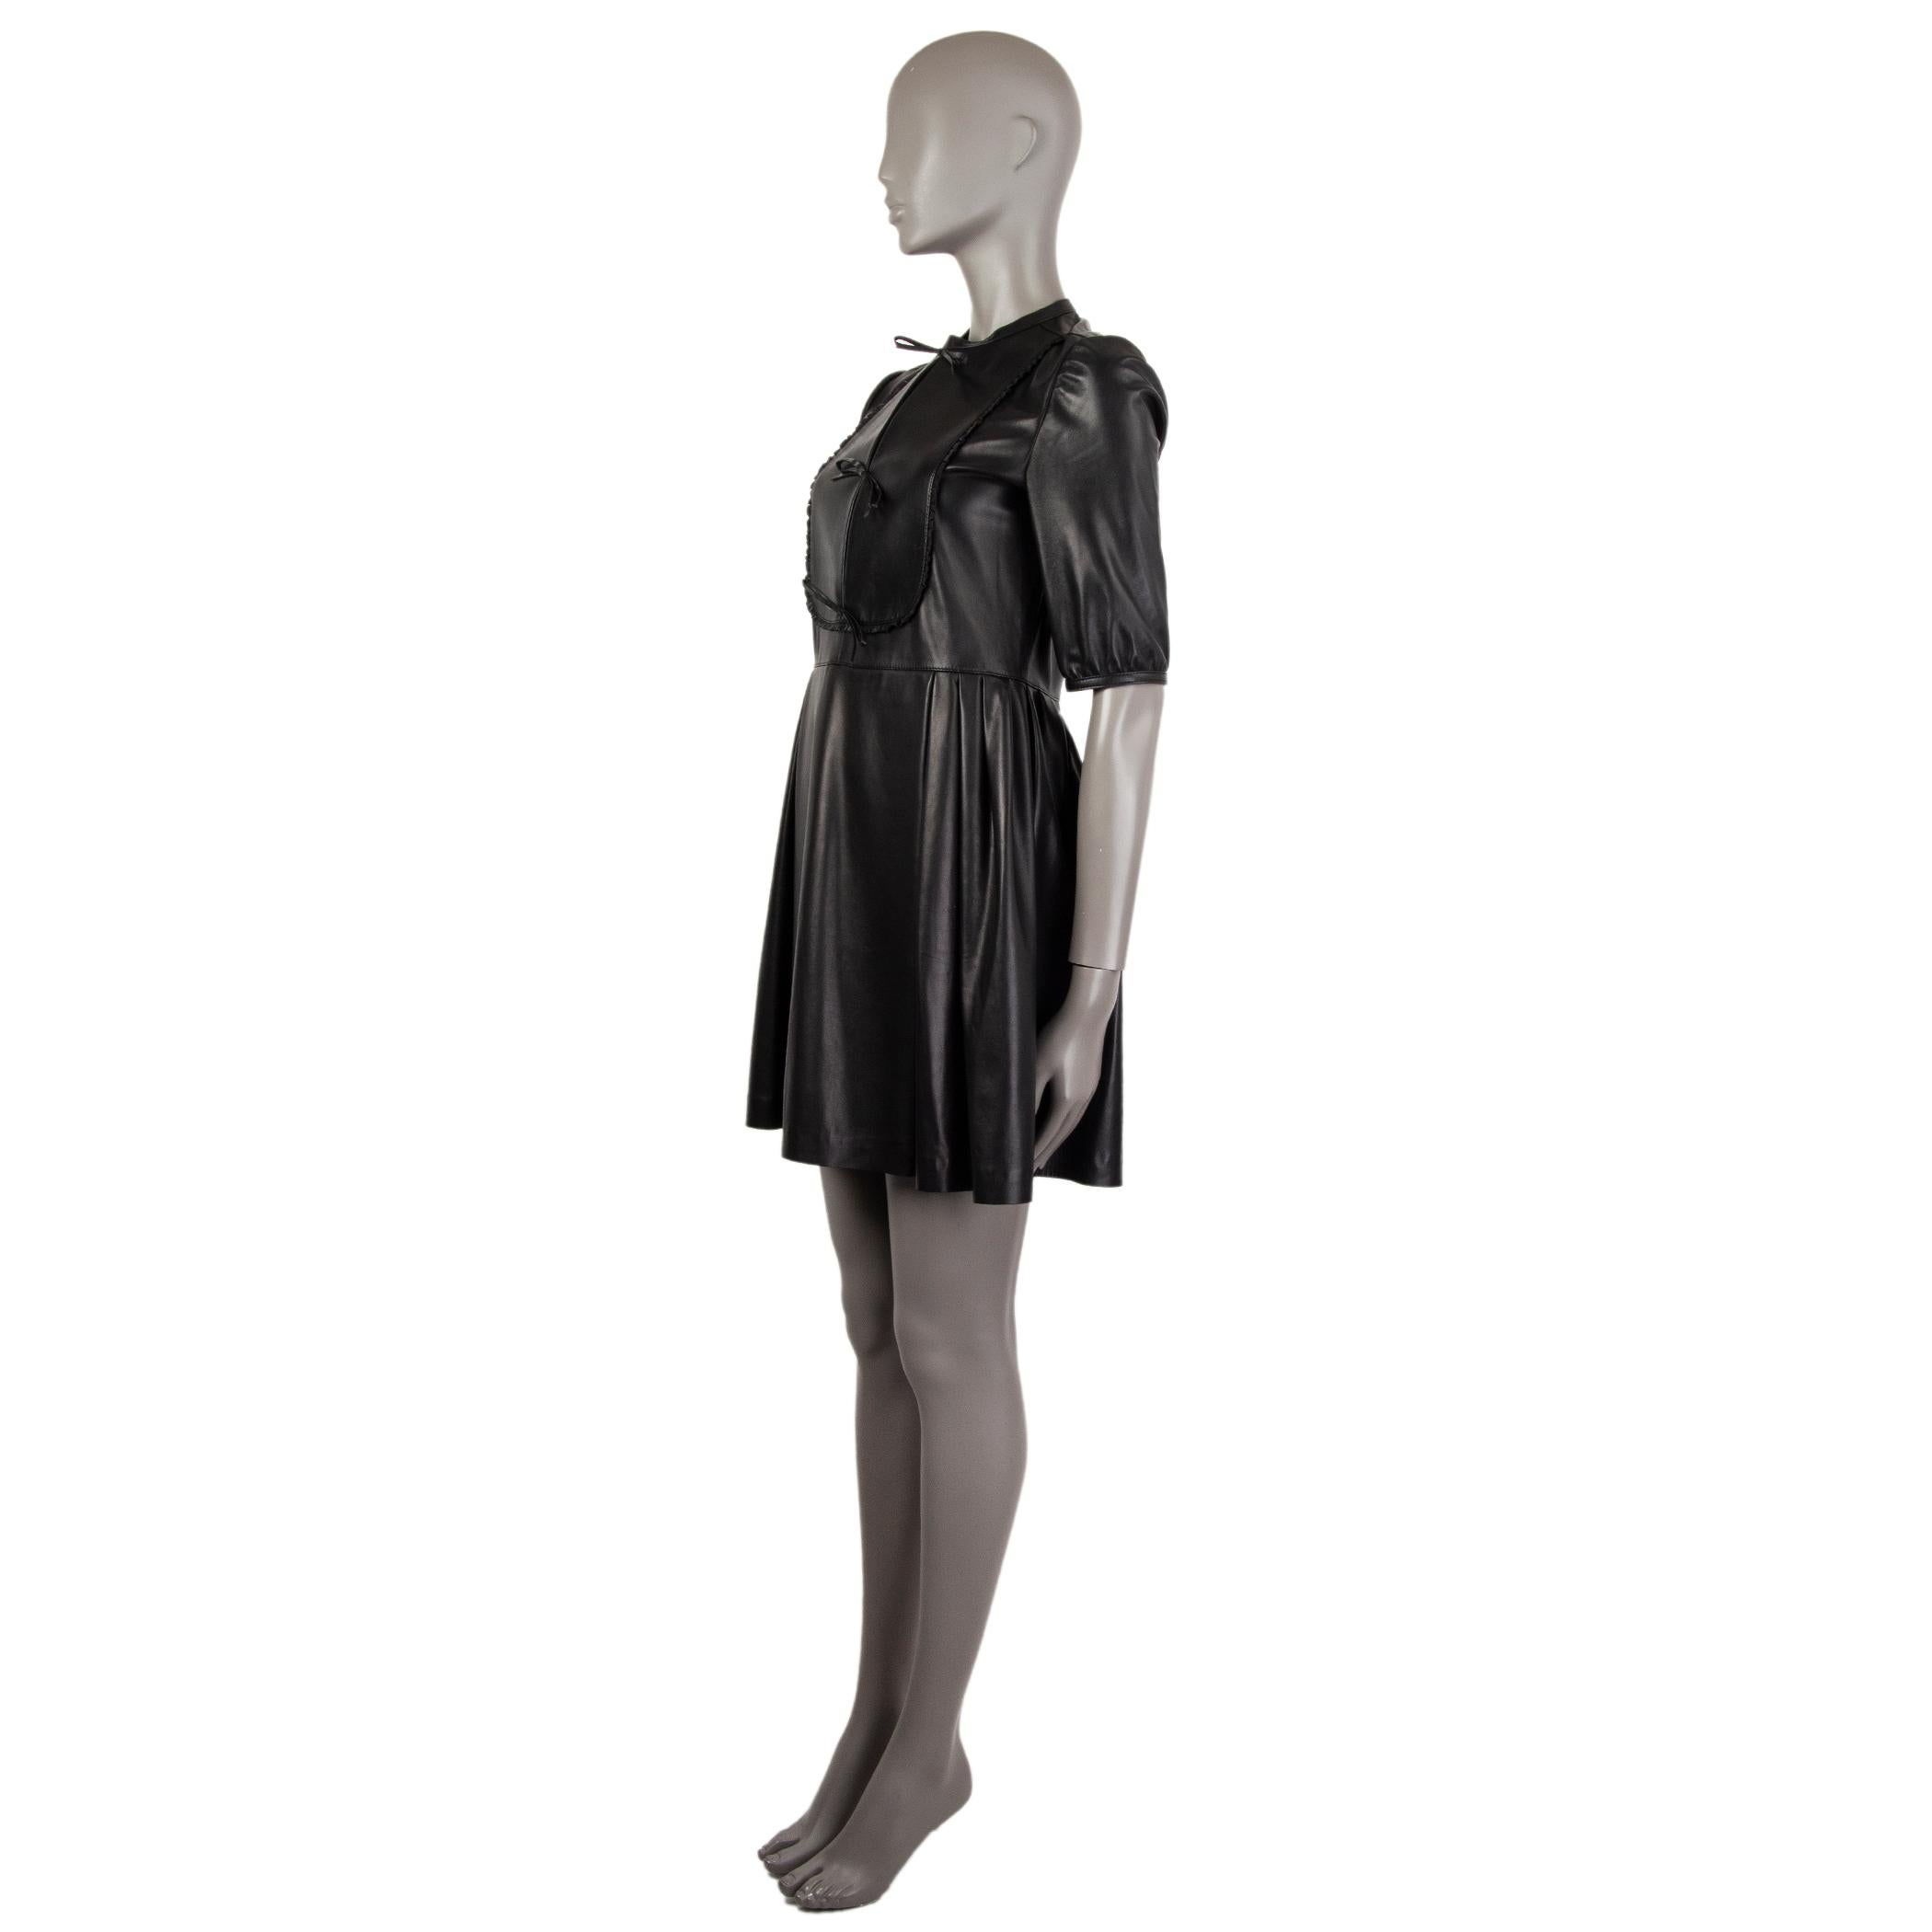 Valentino 3/4-sleeve dress in black lambskin. With keyhole neck tied with three leasther bows, ruffle-trim bib, pleated skirt, and one-button narrow cuffs. Closes with button and concealed zipper on the back. Unlined. Has been worn and is in